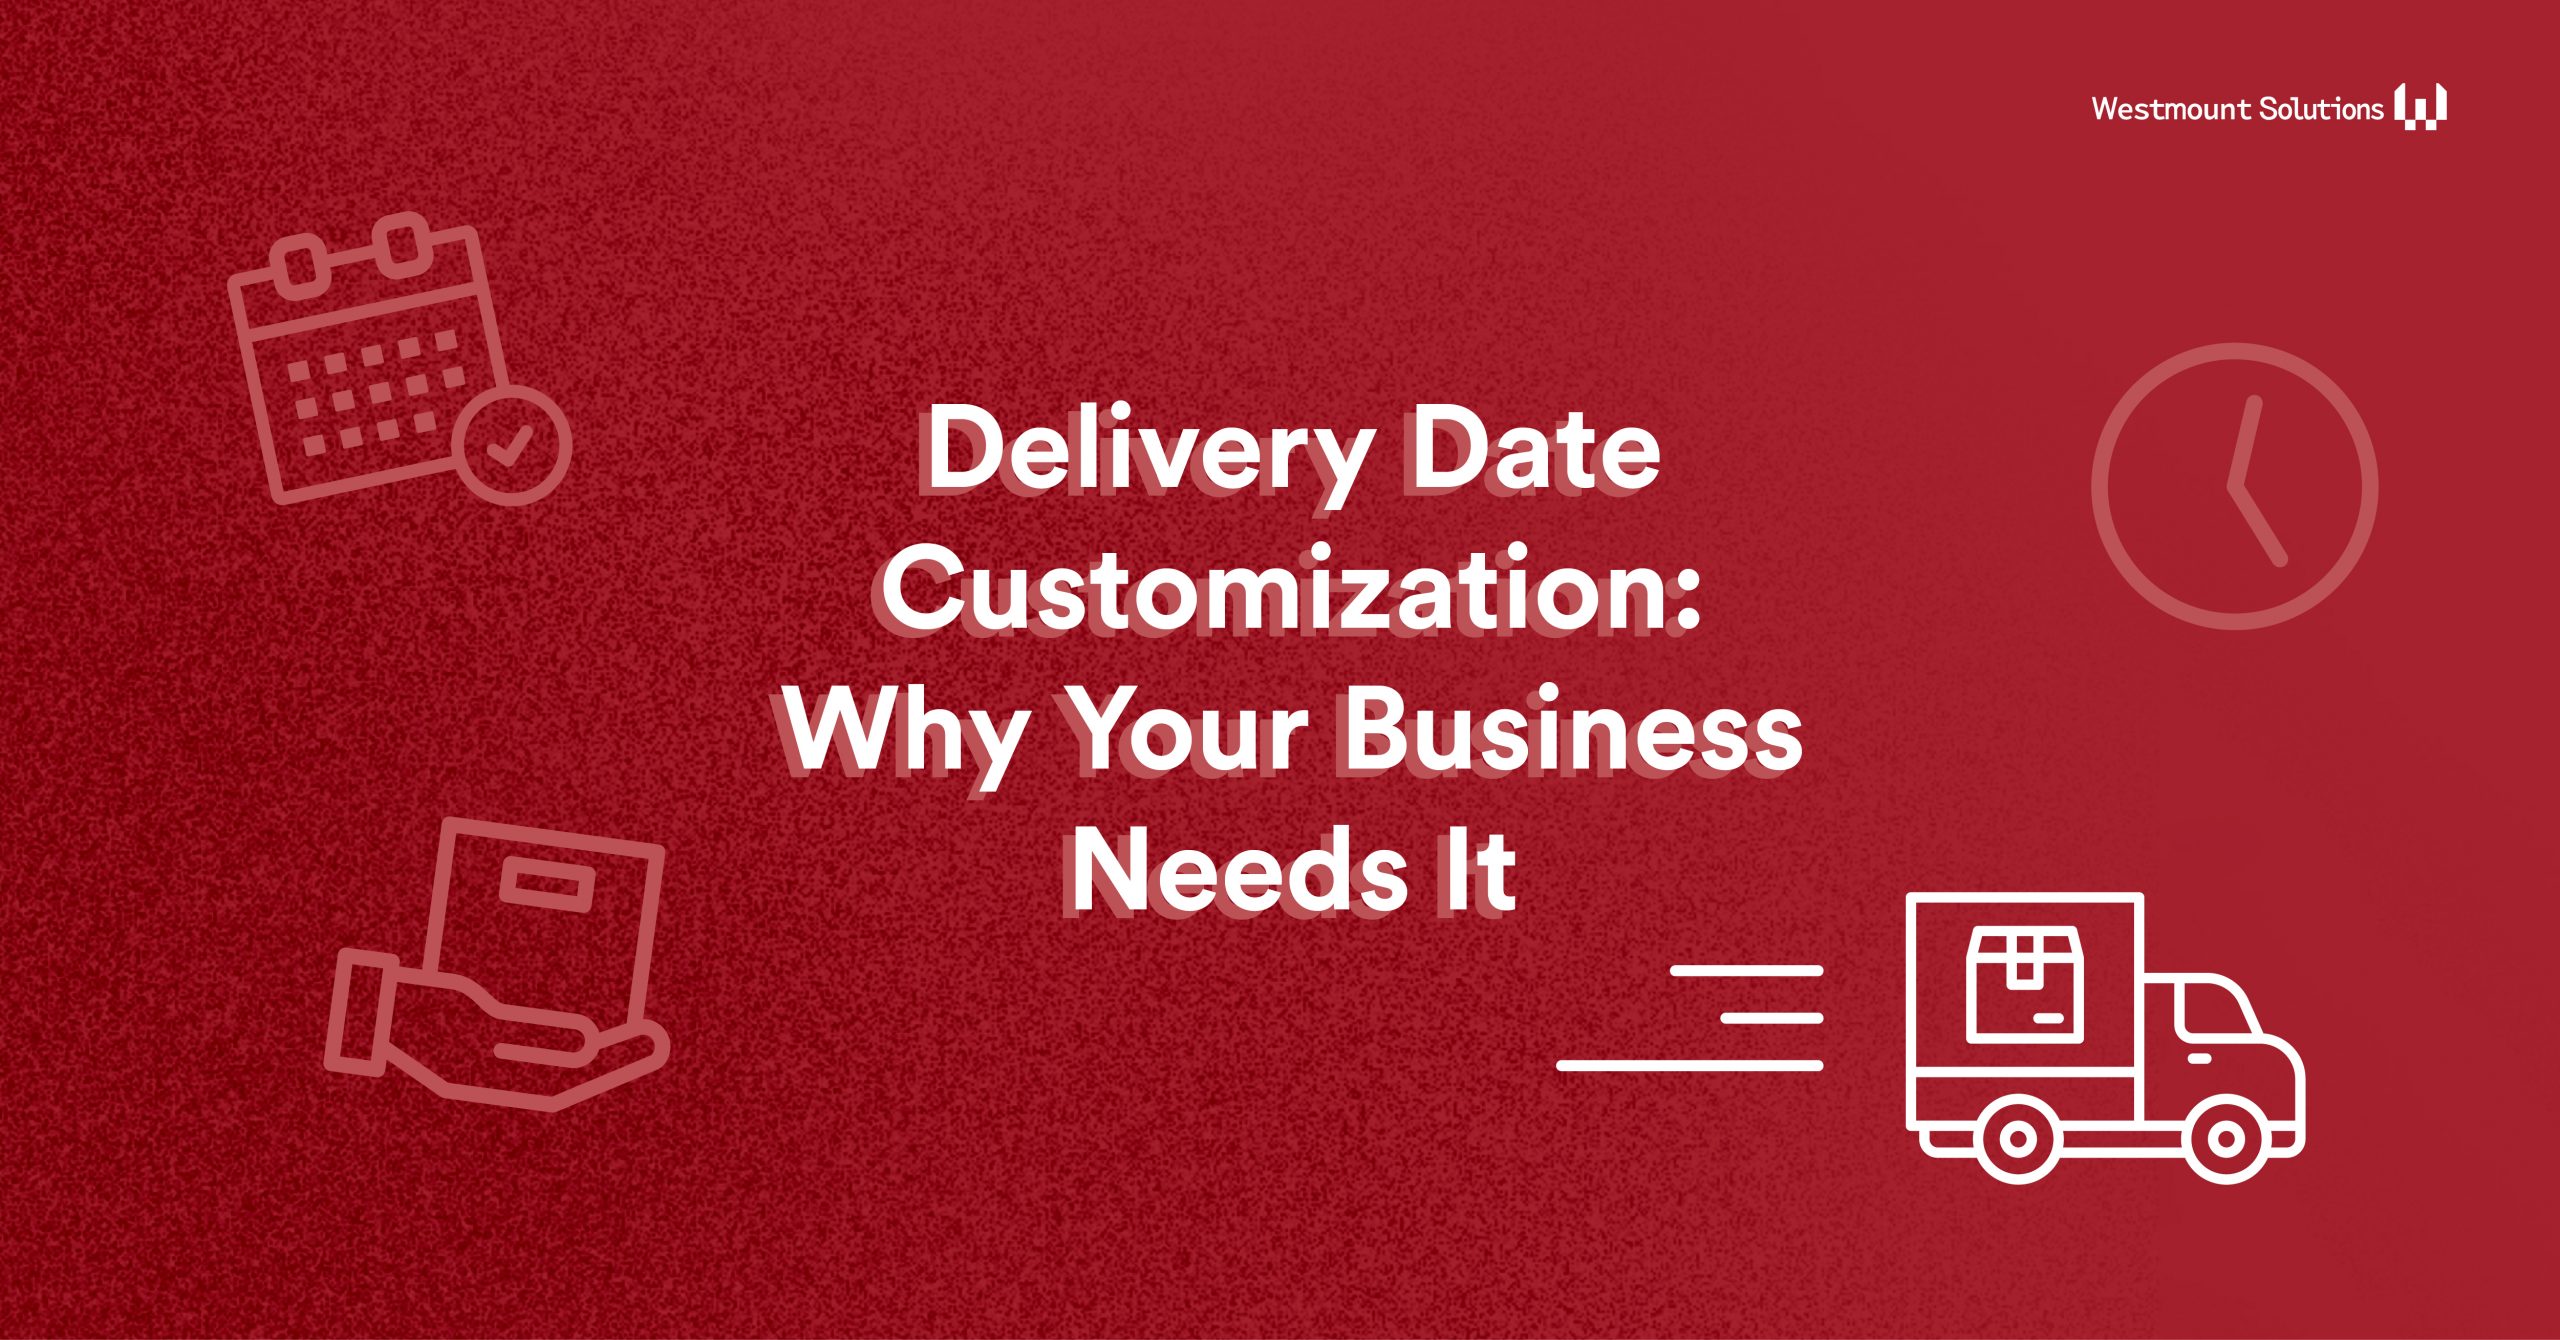 Delivery Date Customization Westmount Solutions, Inc.